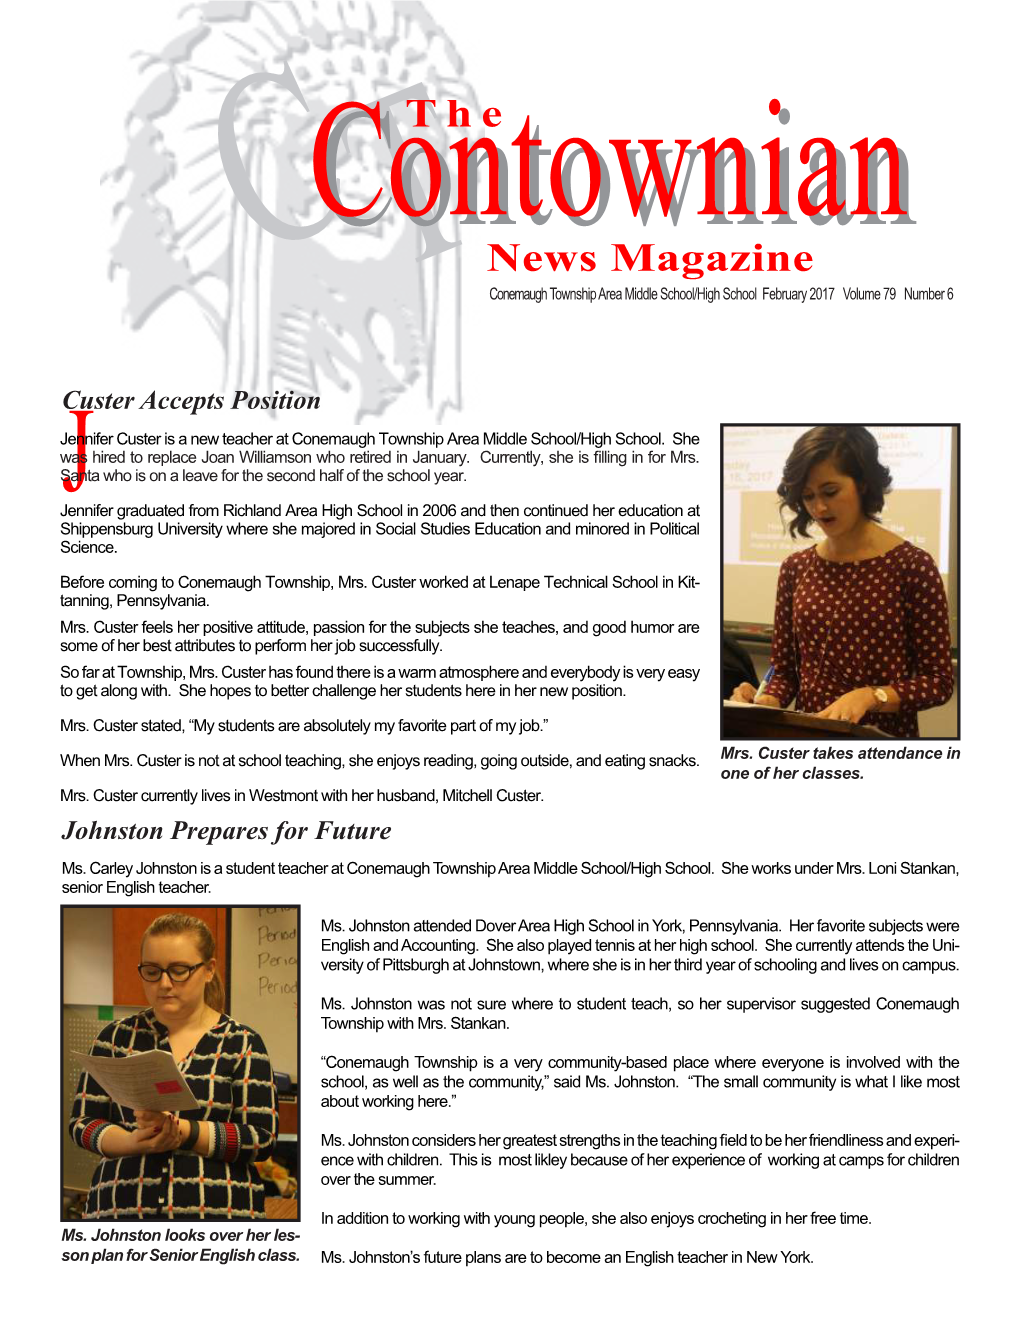 News Magazine C Tconemaugh Township Area Middle School/High School February 2017 Volume 79 Number 6